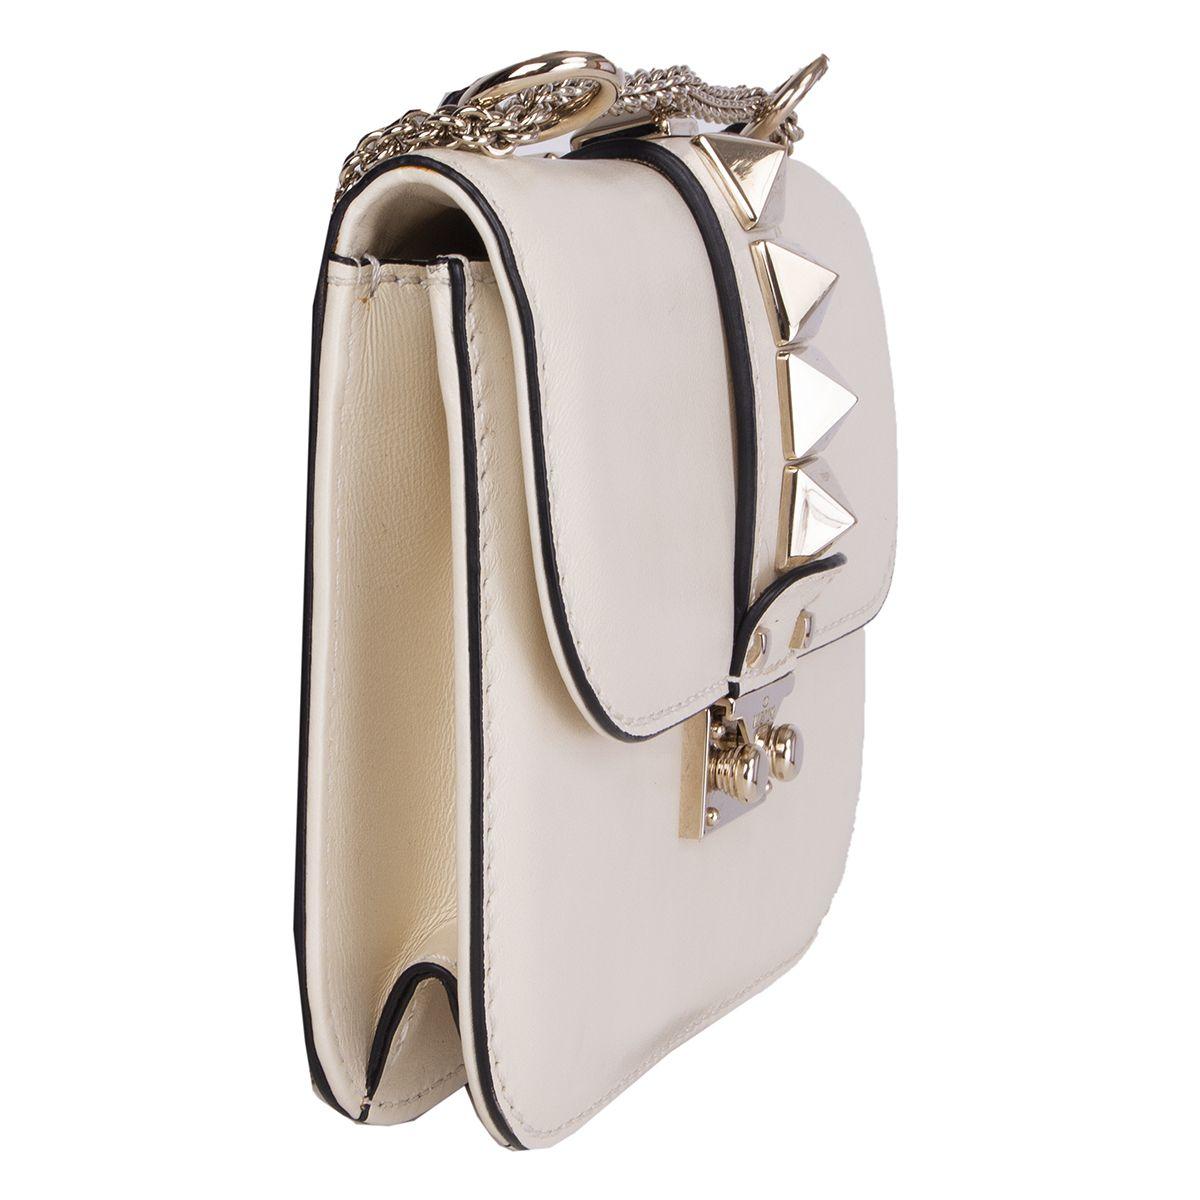 Valentino 'Small Lock' chain shoulder bag in off-white smooth calfskin featuring light gold-tone ruthenium finish metal studs. Opens with a tuck catch closure with engraved logo. Lined in beige canvas with one zip pocket against the back and one